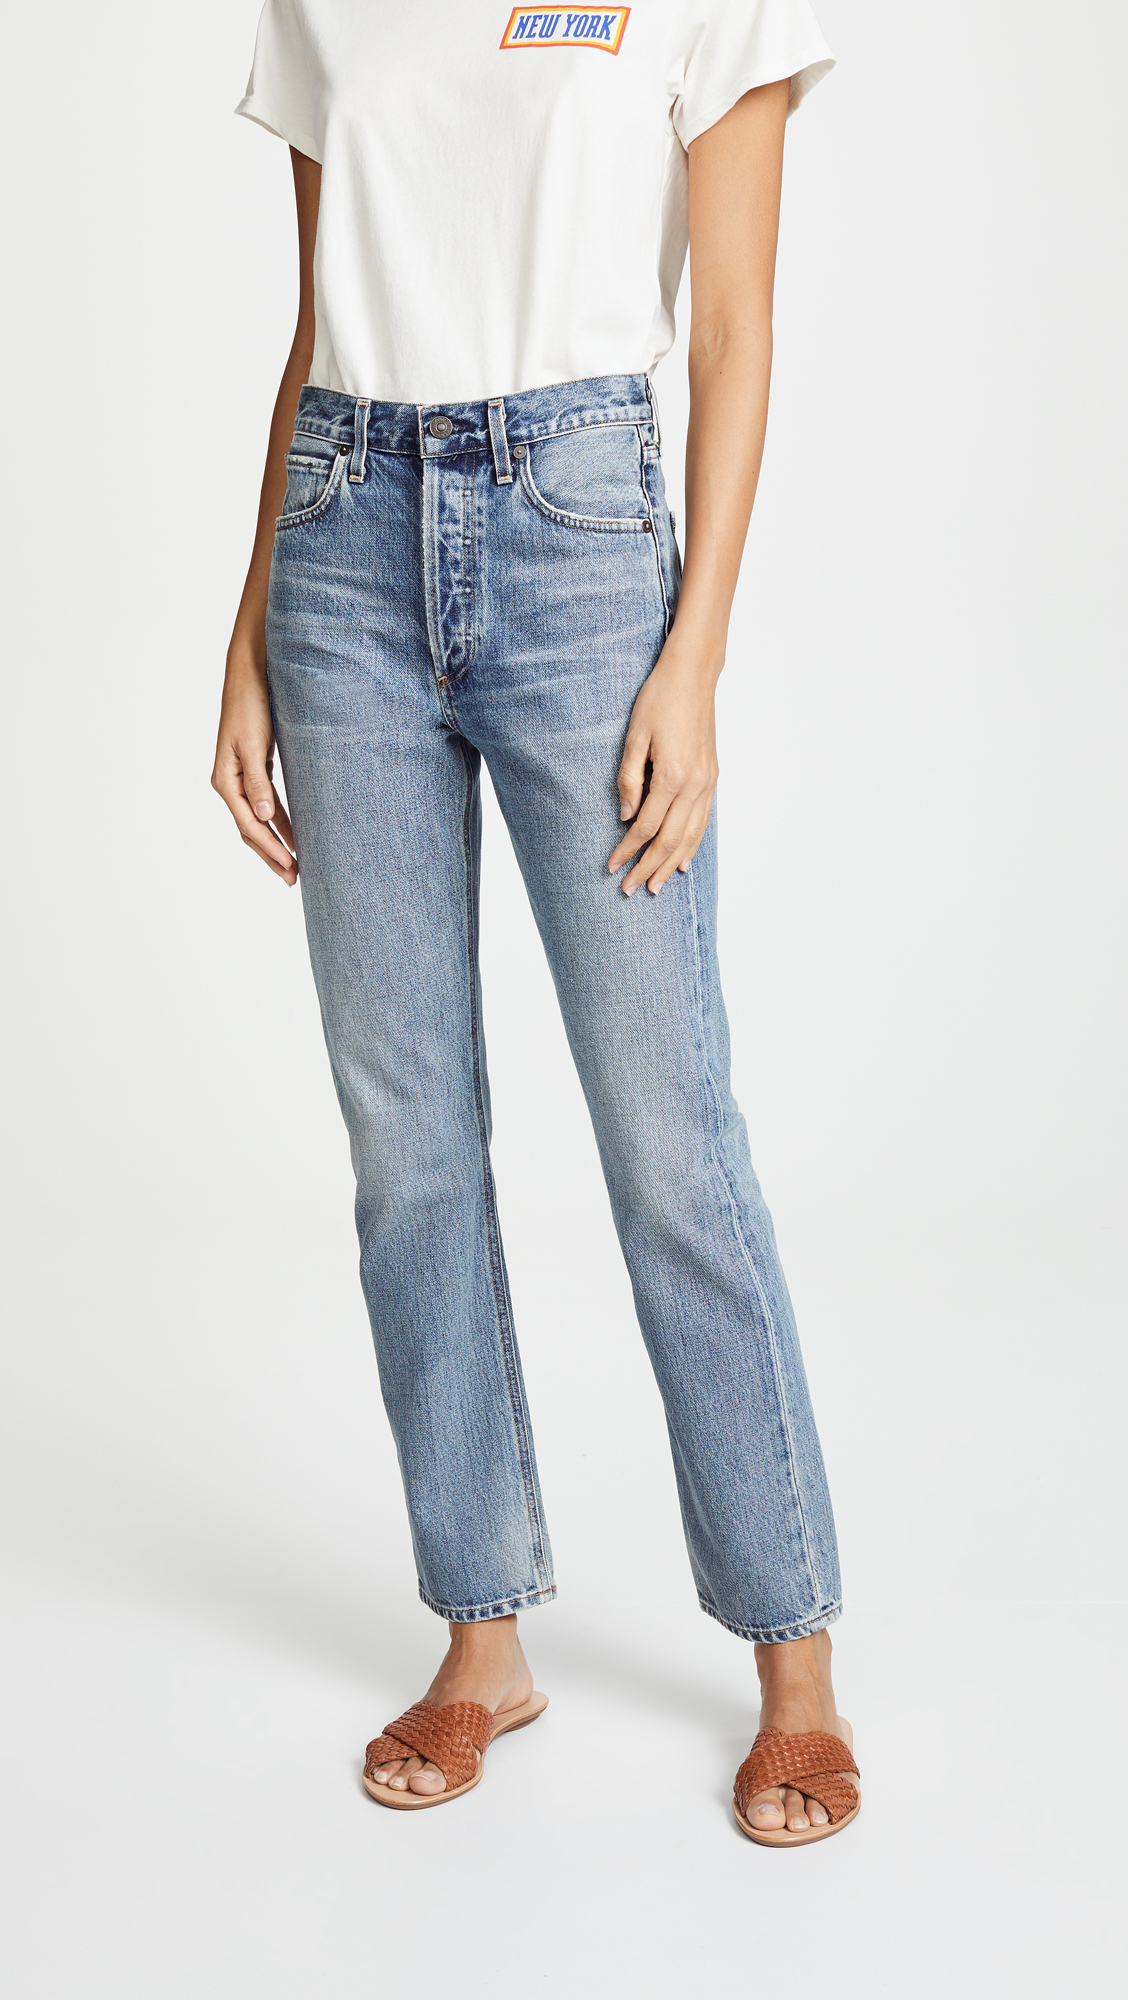 The 7 Best Jeans to Wear During Summer 